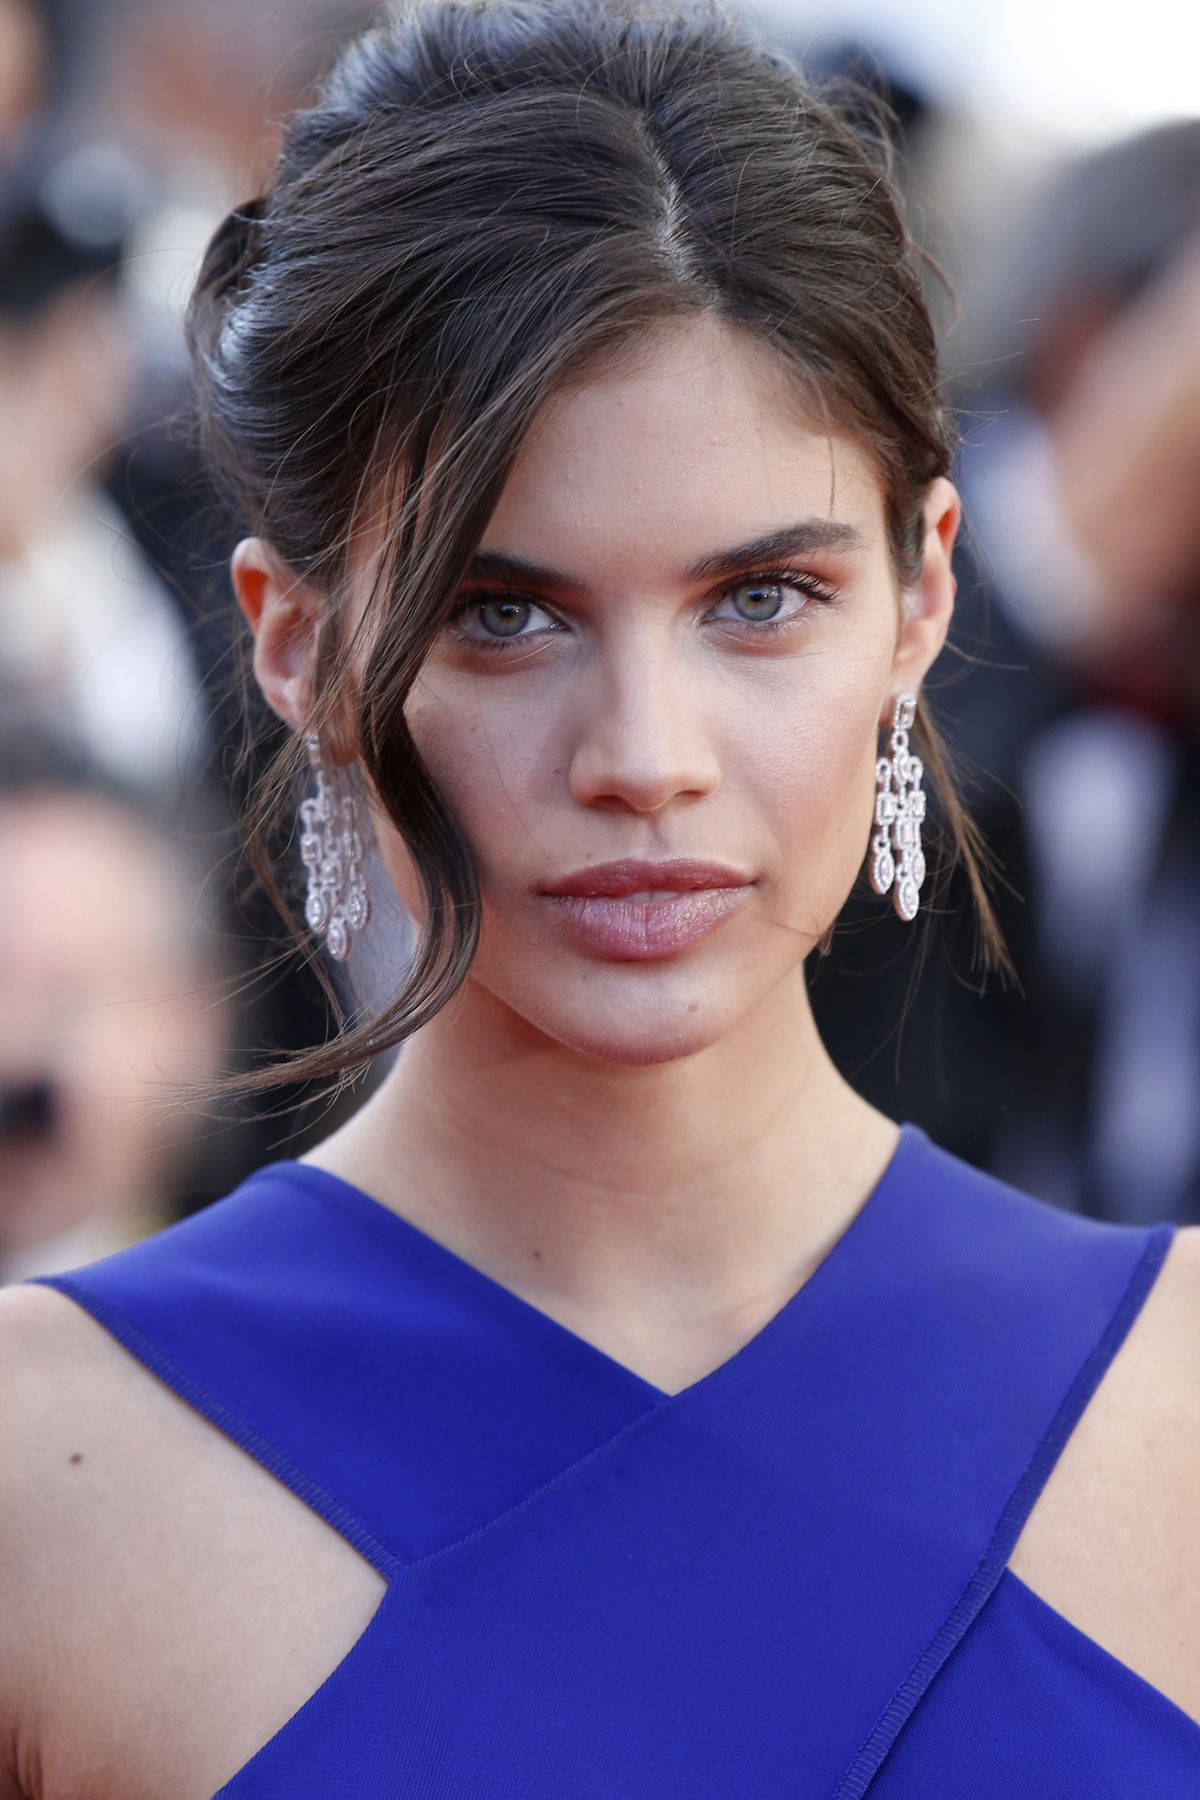 SARA SAMPAIO at Youth Premiere at Cannes Film Festival – HawtCelebs